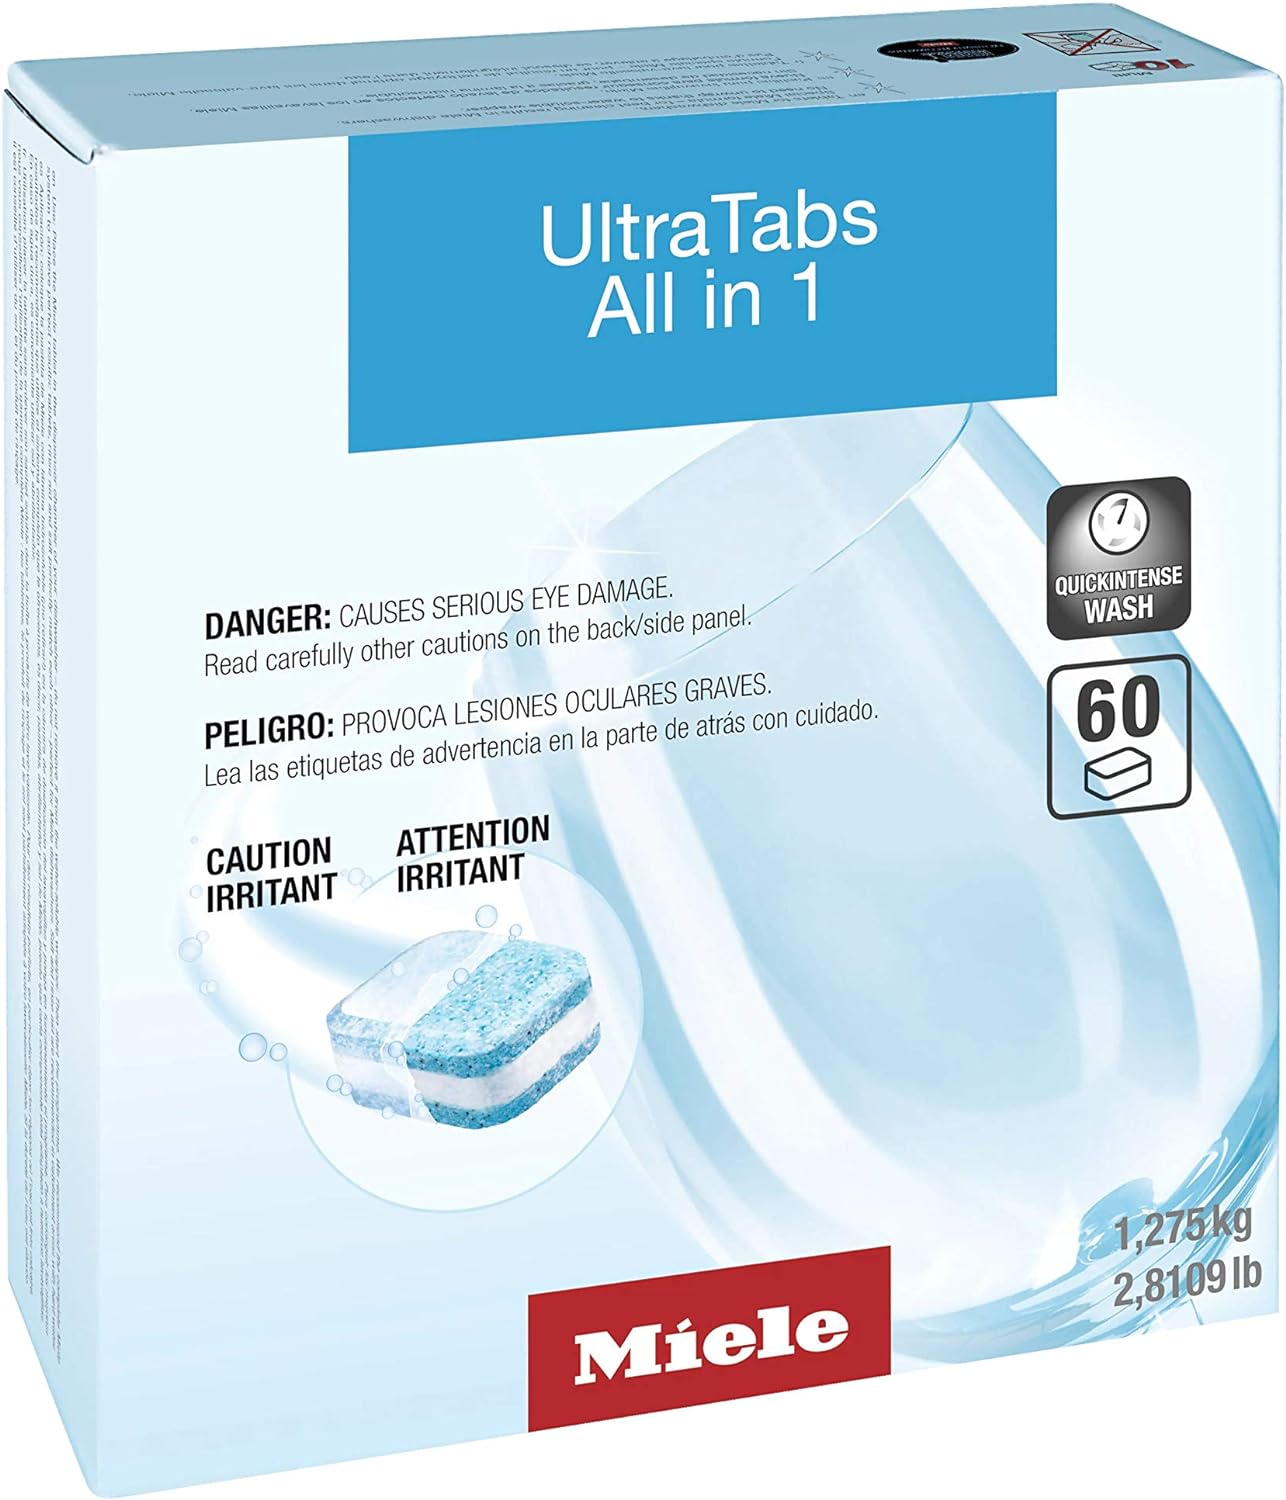 Miele 10245660 Dishwasher Tabs-20 per box 3X20, 60 Count (Pack of 1), White